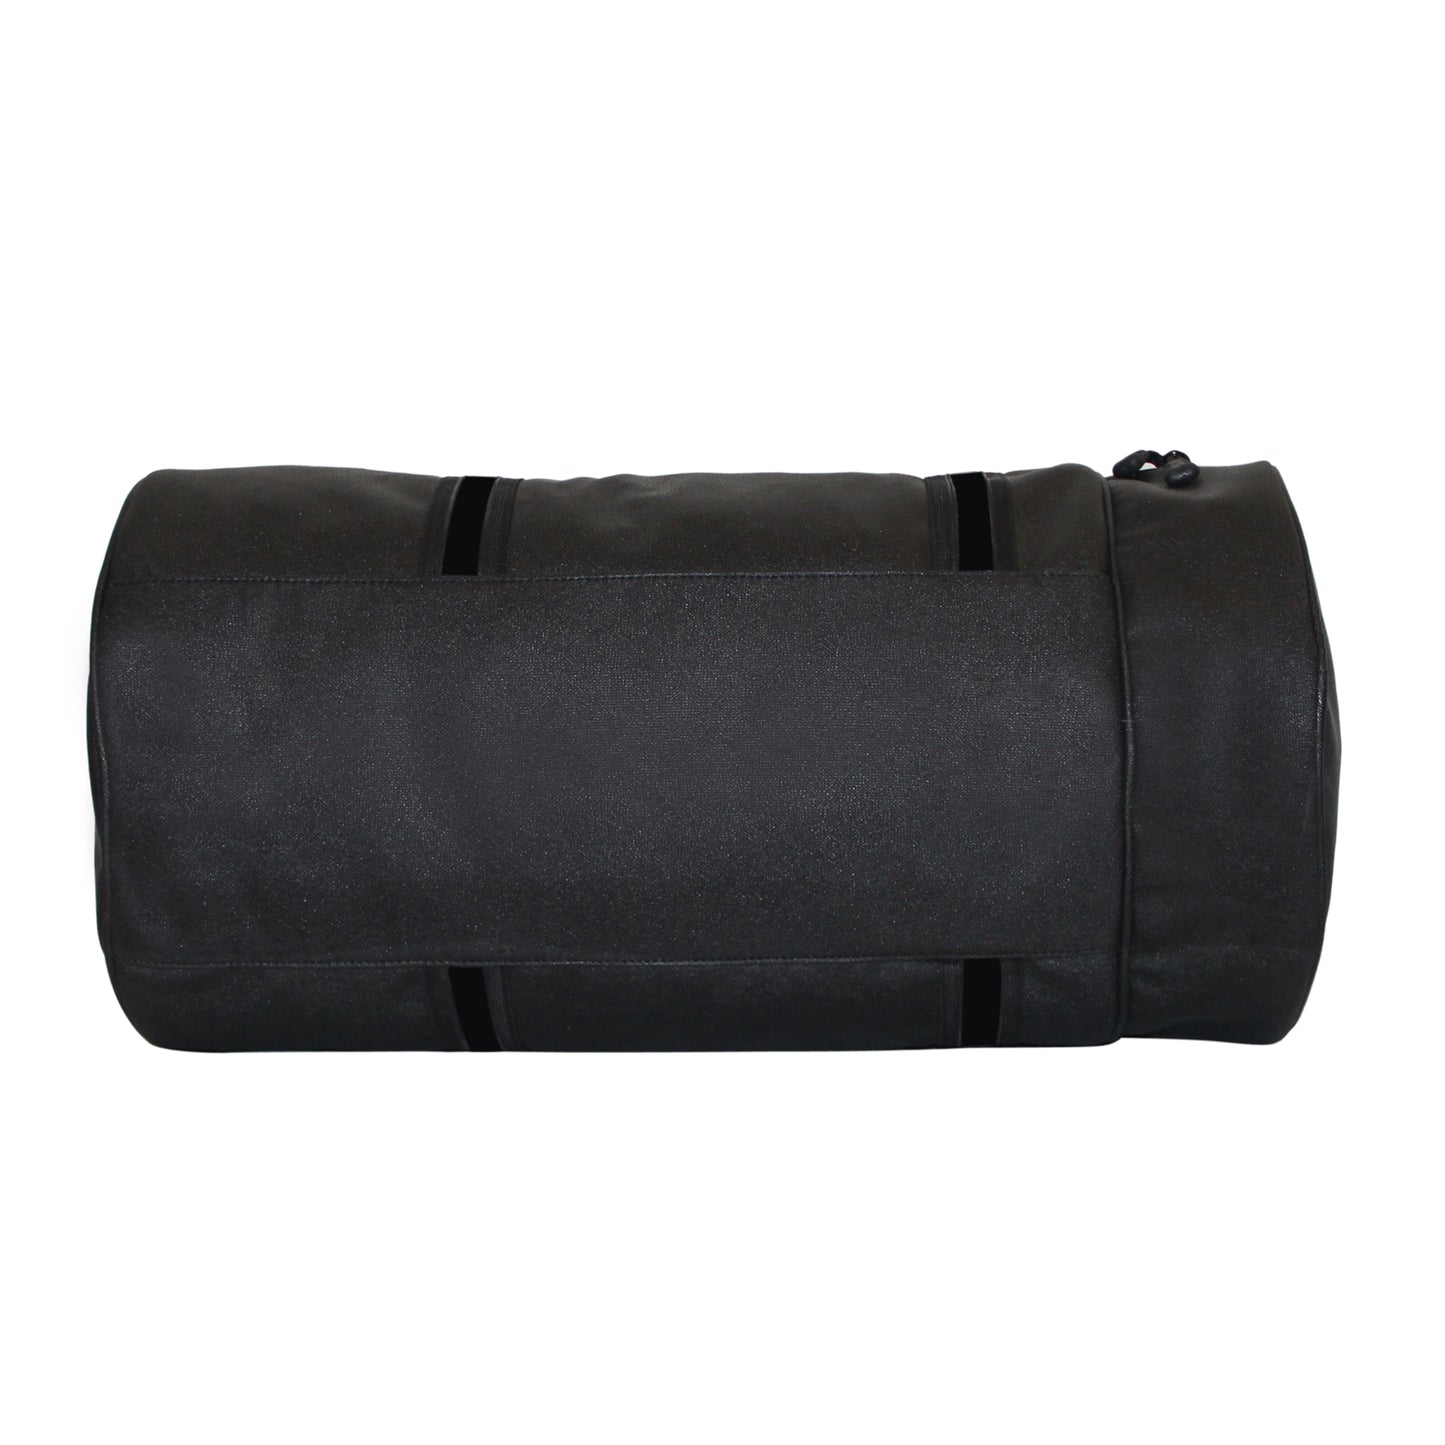 Stylish All Black Faux Leather Duffle